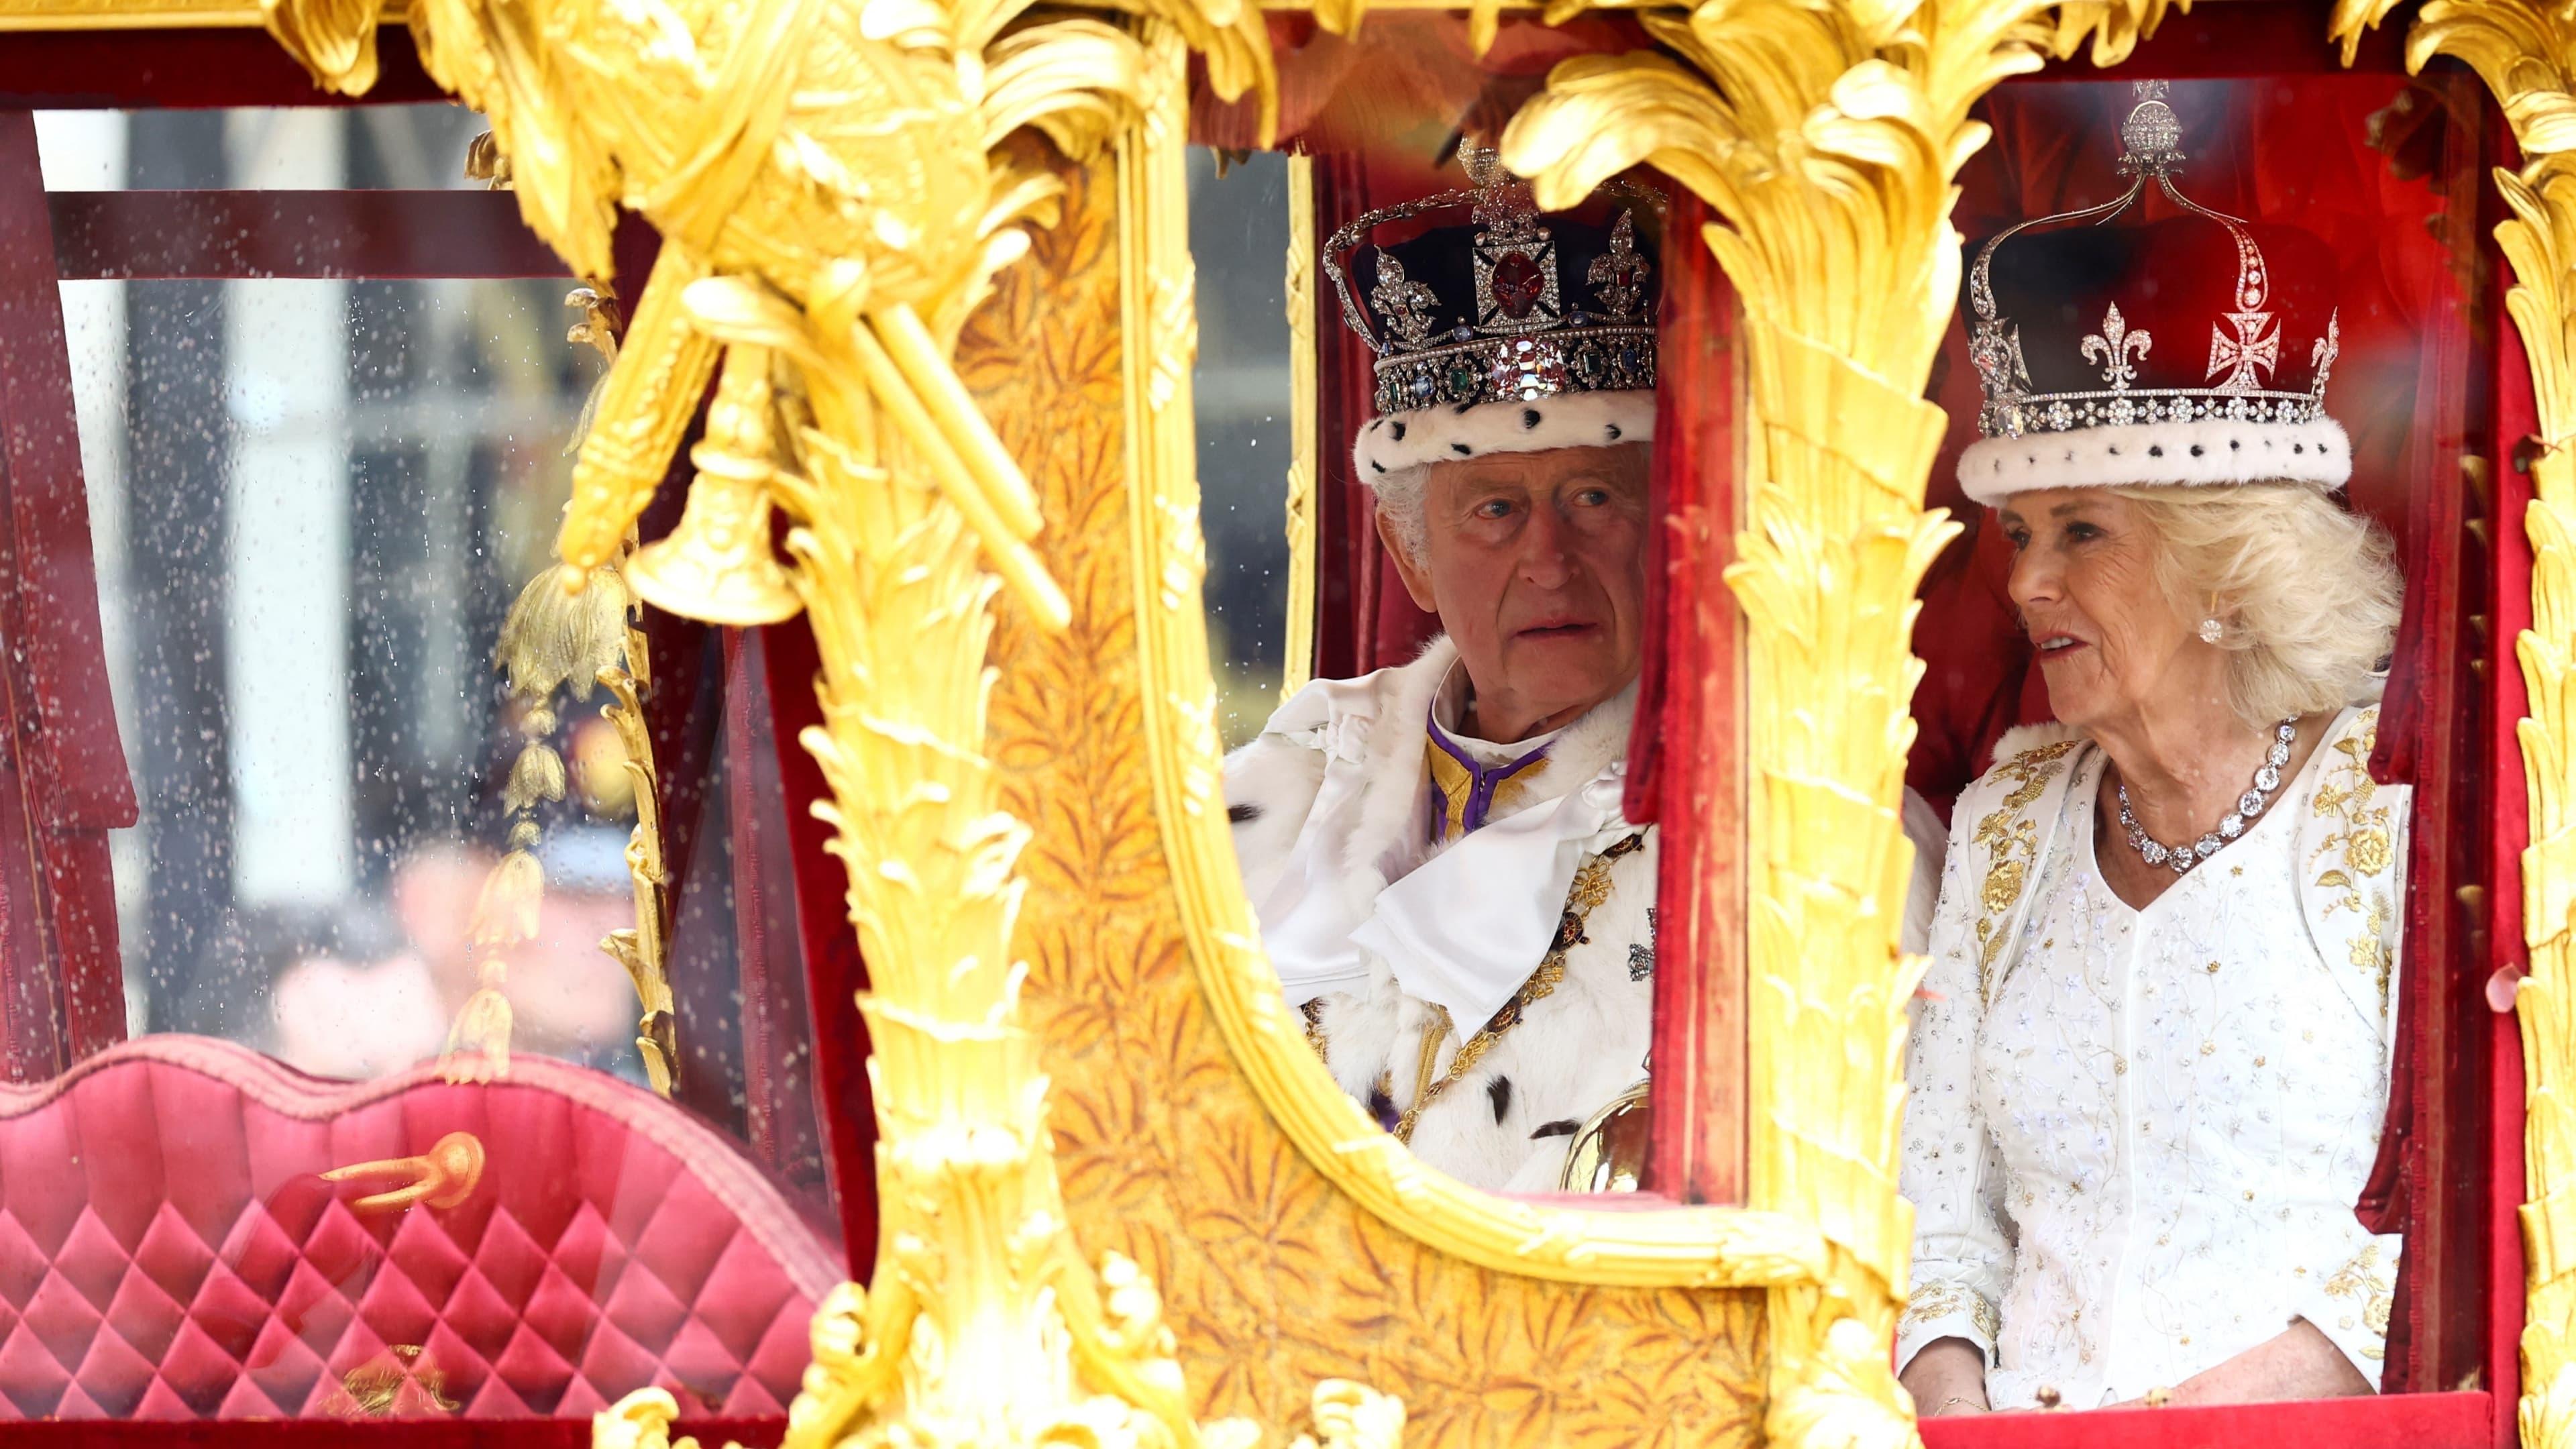 The Coronation of TM King Charles III and Queen Camilla backdrop